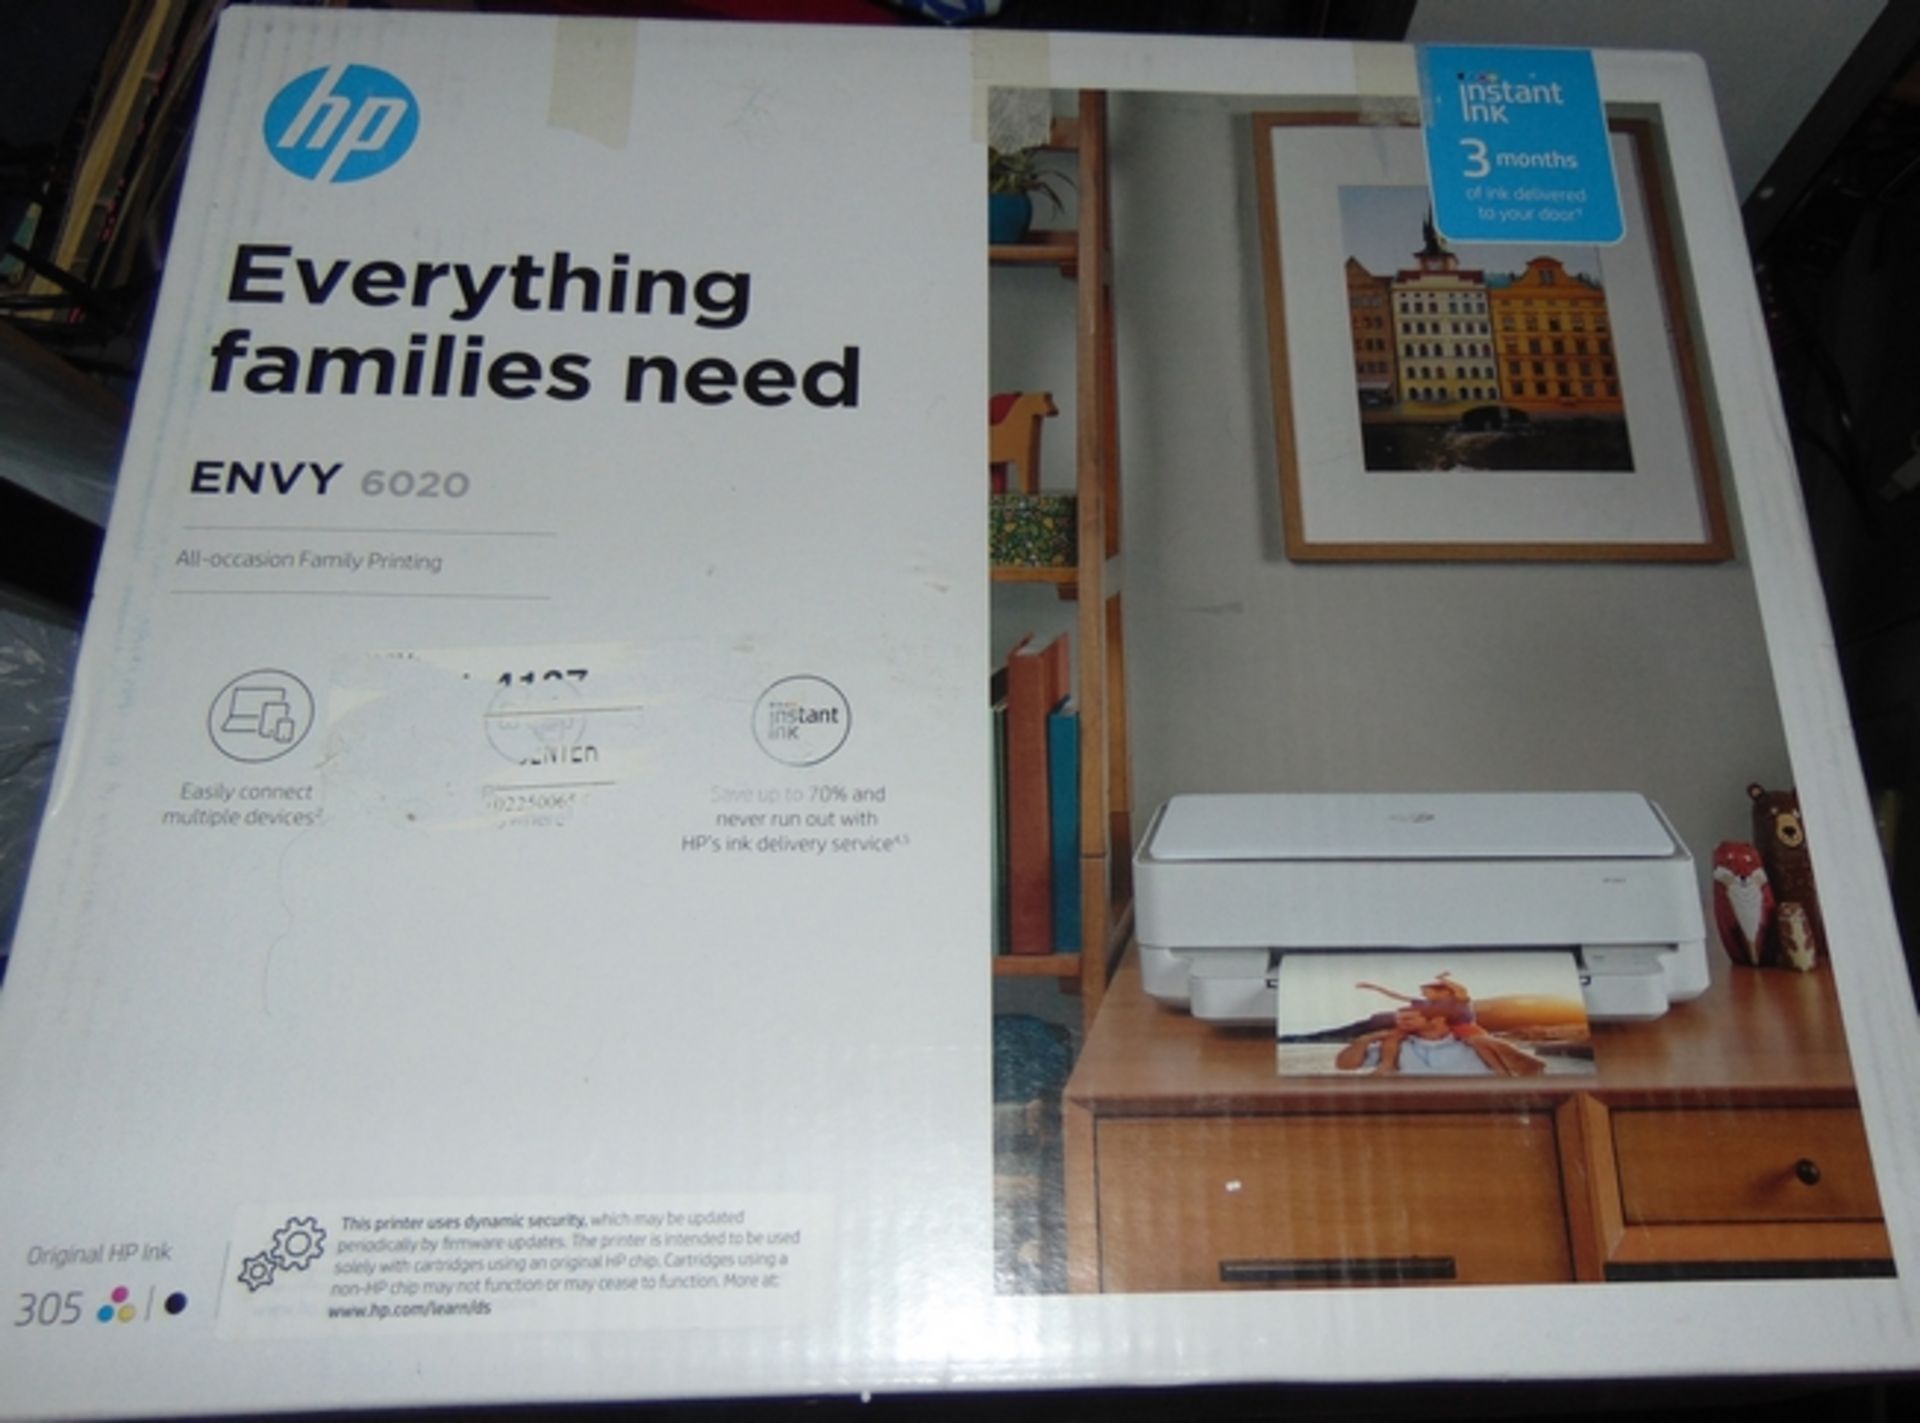 Area H3A. Hp Envy 6020 Printer, Looks New